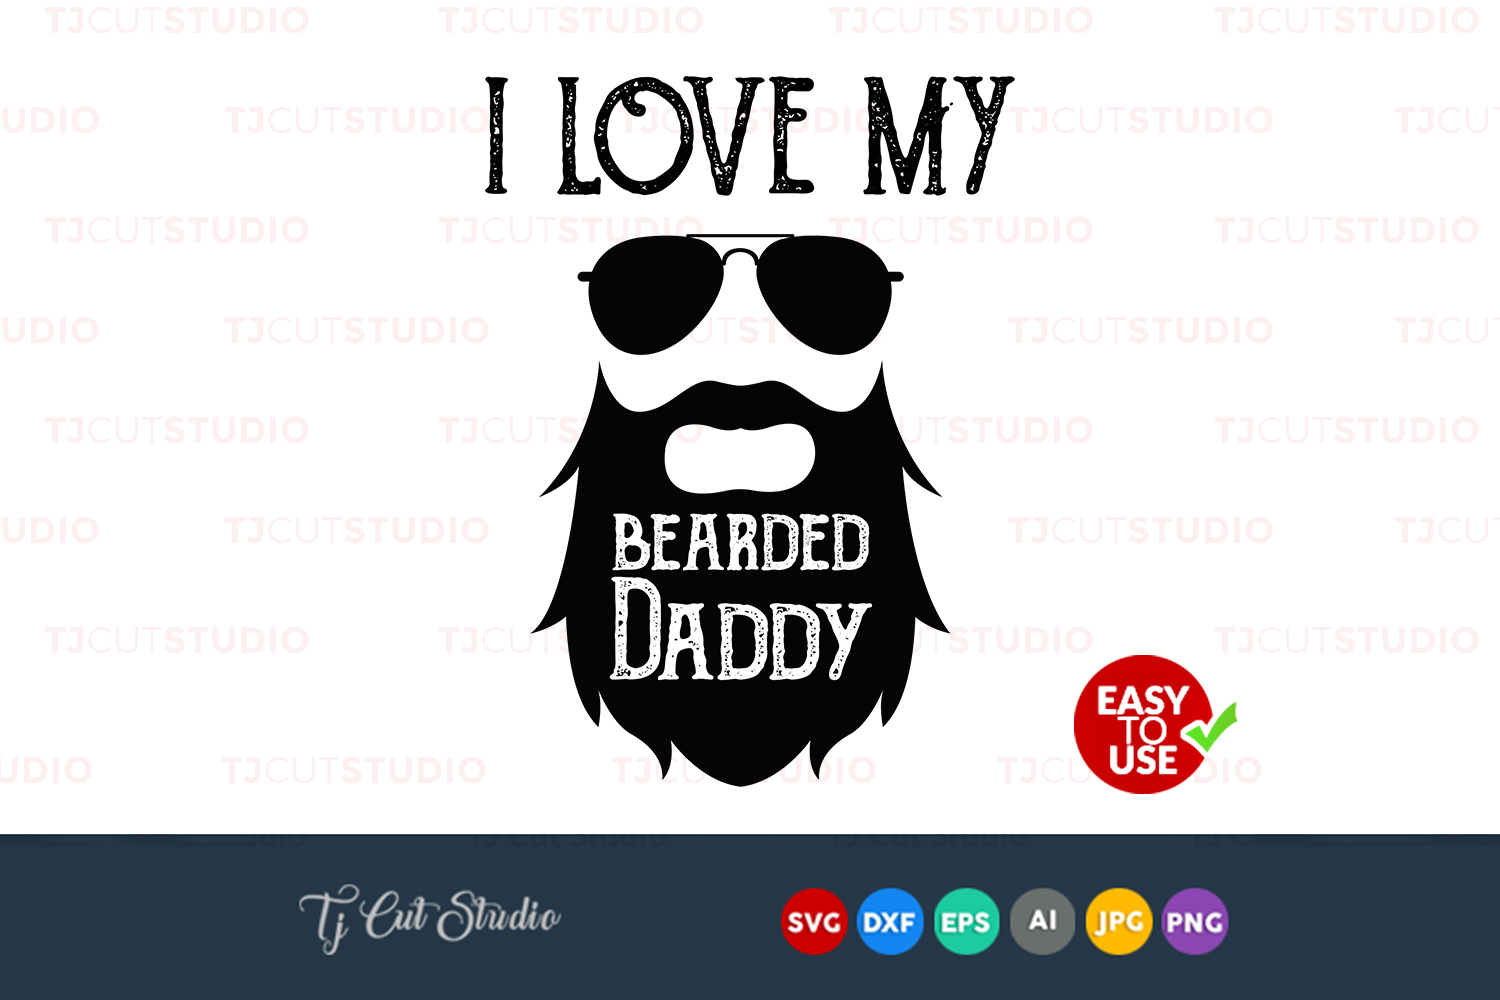 Download Fathers Day Bearded Dad Svg